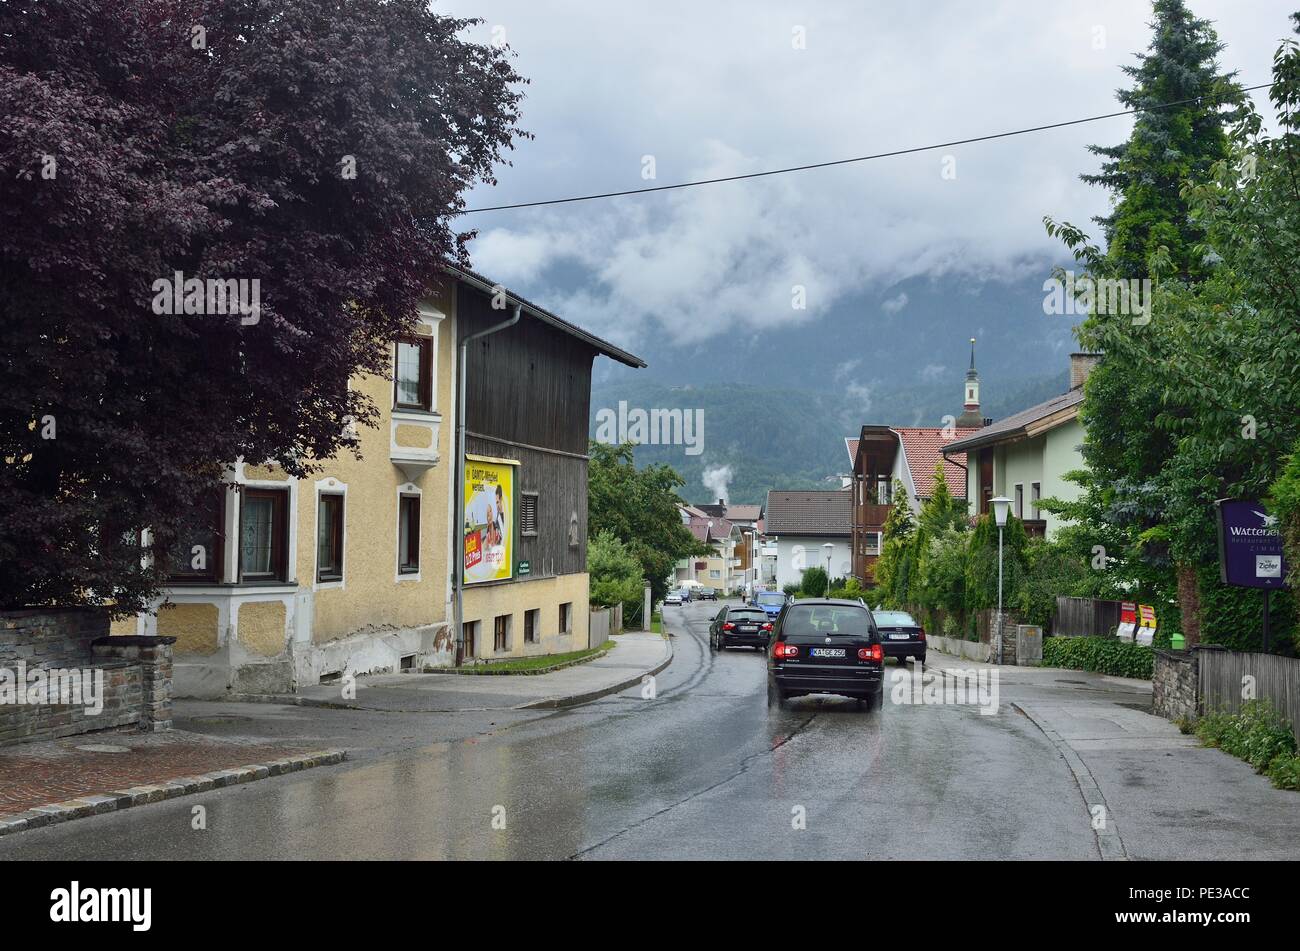 A typical scene of houses on both sides of a narrow road with cars plying on. Alps Mountain Ranges in the background, Wattens, Austria, Europe Stock Photo